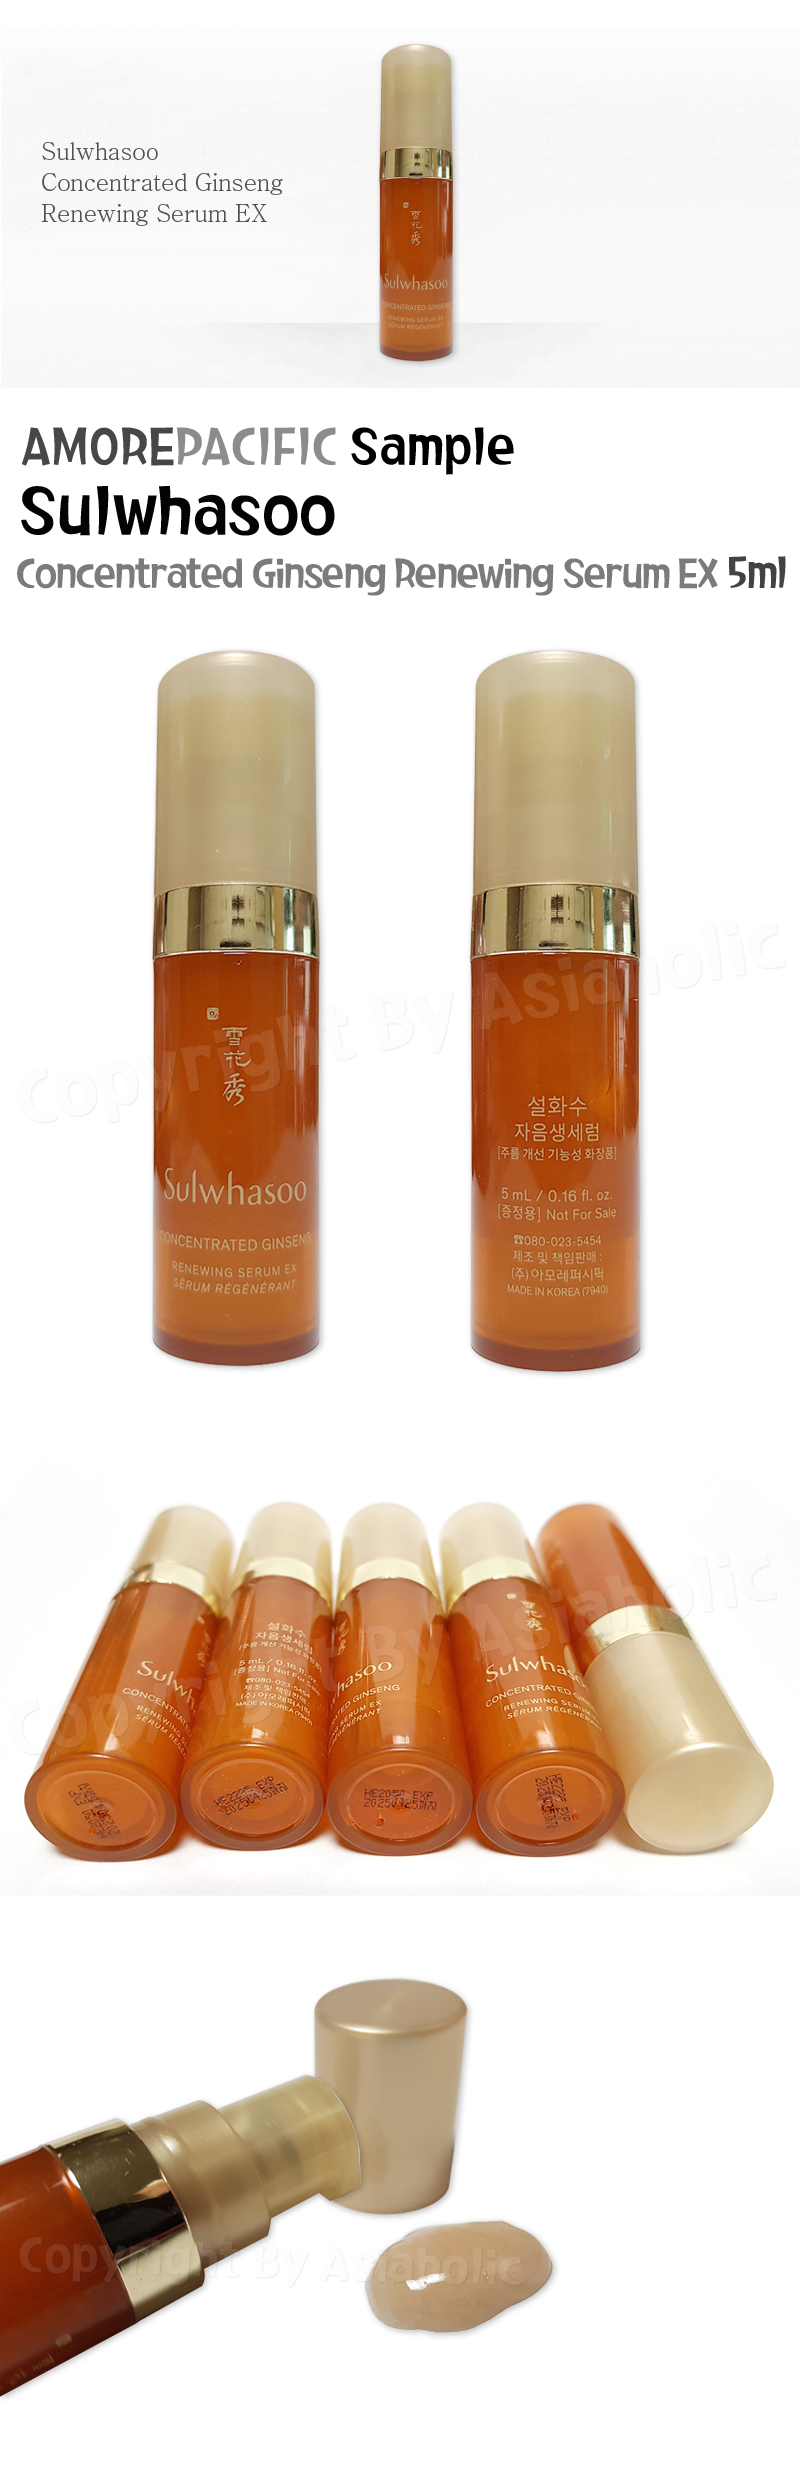 Sulwhasoo Concentrated Ginseng Renewing Serum EX 5ml (1pcs ~ 20pcs) Newest Version